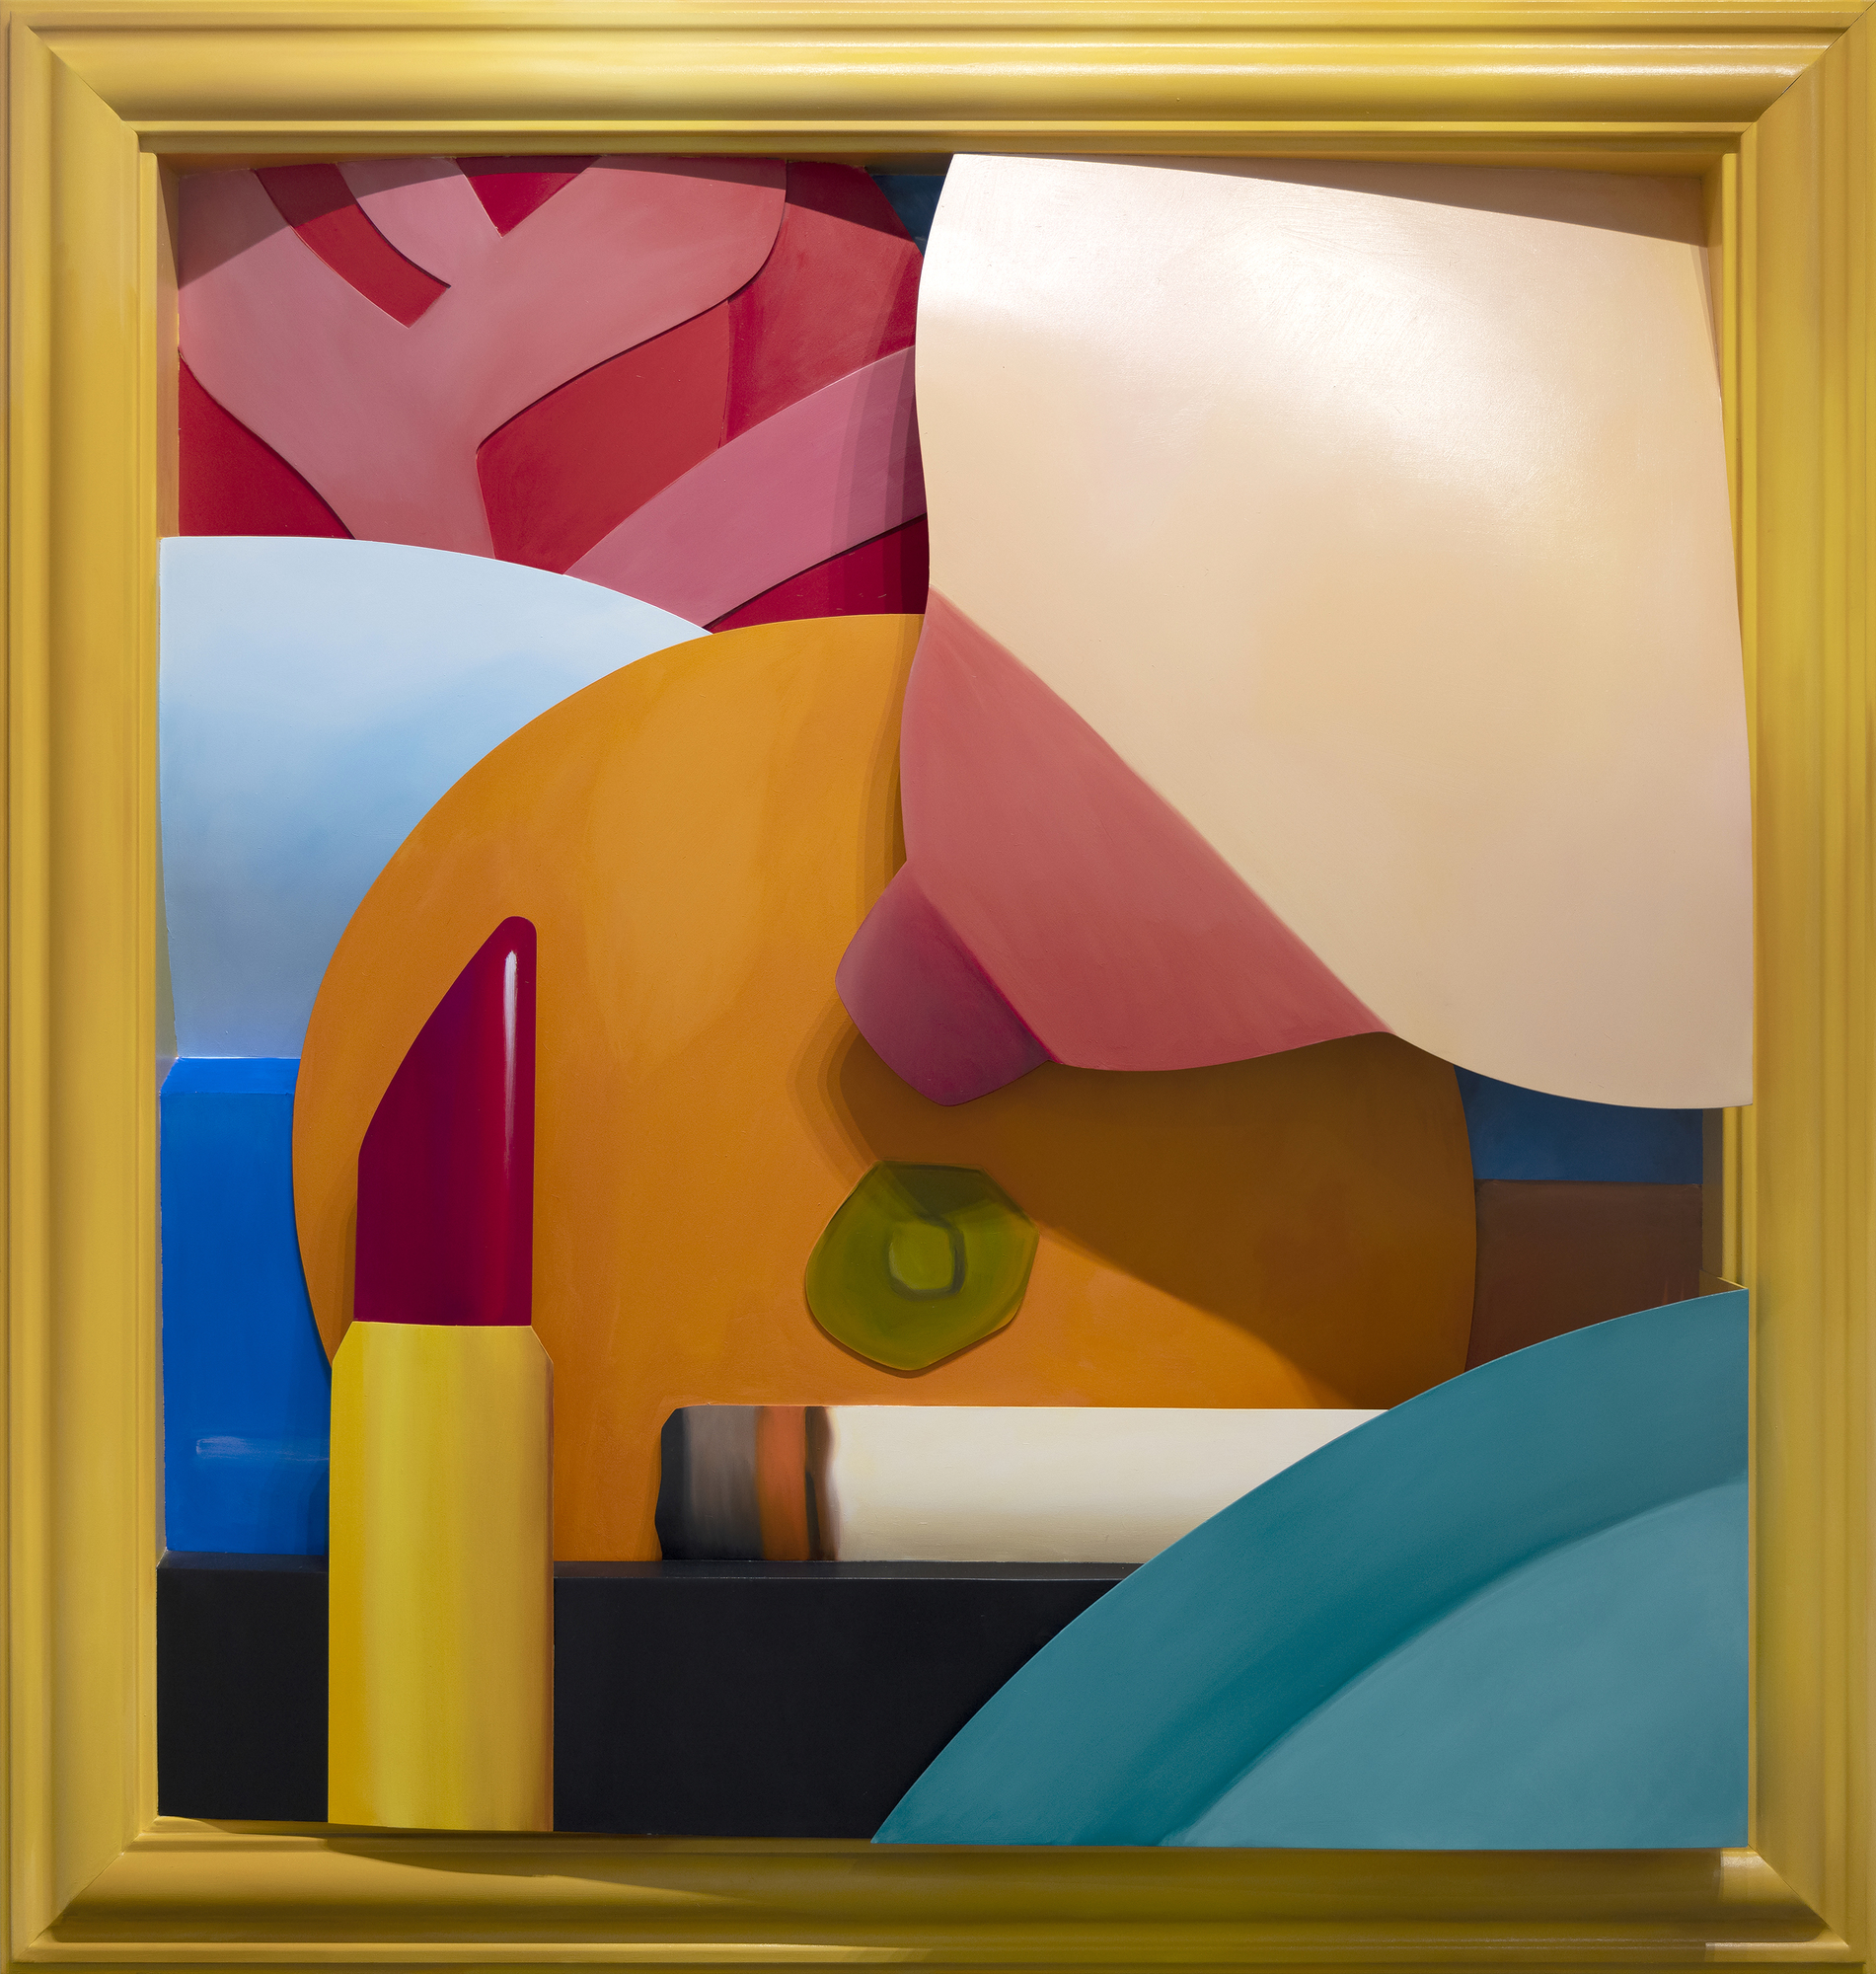 Tom Wesselmann was a leader of the Pop Art movement. He is best remembered for large-scale works, including his Great American Nude series, in which Wesselmann combined sensual imagery with everyday objects depicted in bold and vibrant colors. As he developed in his practice, Wesselmann grew beyond the traditional canvas format and began creating shaped canvases and aluminum cut-outs that often functioned as sculptural drawings. Continuing his interest in playing with scale, Wesselmann began focusing more closely on the body parts that make up his nudes. He created his Mouth series and his Bedroom series in which particular elements, rather than the entire sitter, become the focus.&lt;br&gt; &lt;br&gt;Bedroom Breast (2004) combines these techniques, using vivid hues painted on cut-out aluminum. The work was a special commission for a private collector&#039;s residence, and the idea of a bedroom breast piece in oil on 3-D cut-out aluminum was one Wesselmann had been working with for many years prior to this work&#039;s creation. The current owner of the piece believed in Wesselmann&#039;s vision and loved the idea of bringing the subject to his home.&lt;br&gt;&lt;br&gt;It&#039;s one of, if not the last, piece Wesselmann completed before he passed away. The present work is the only piece of its kind - there has never been an oil on aluminum in 3D at this scale or of this iconography.  